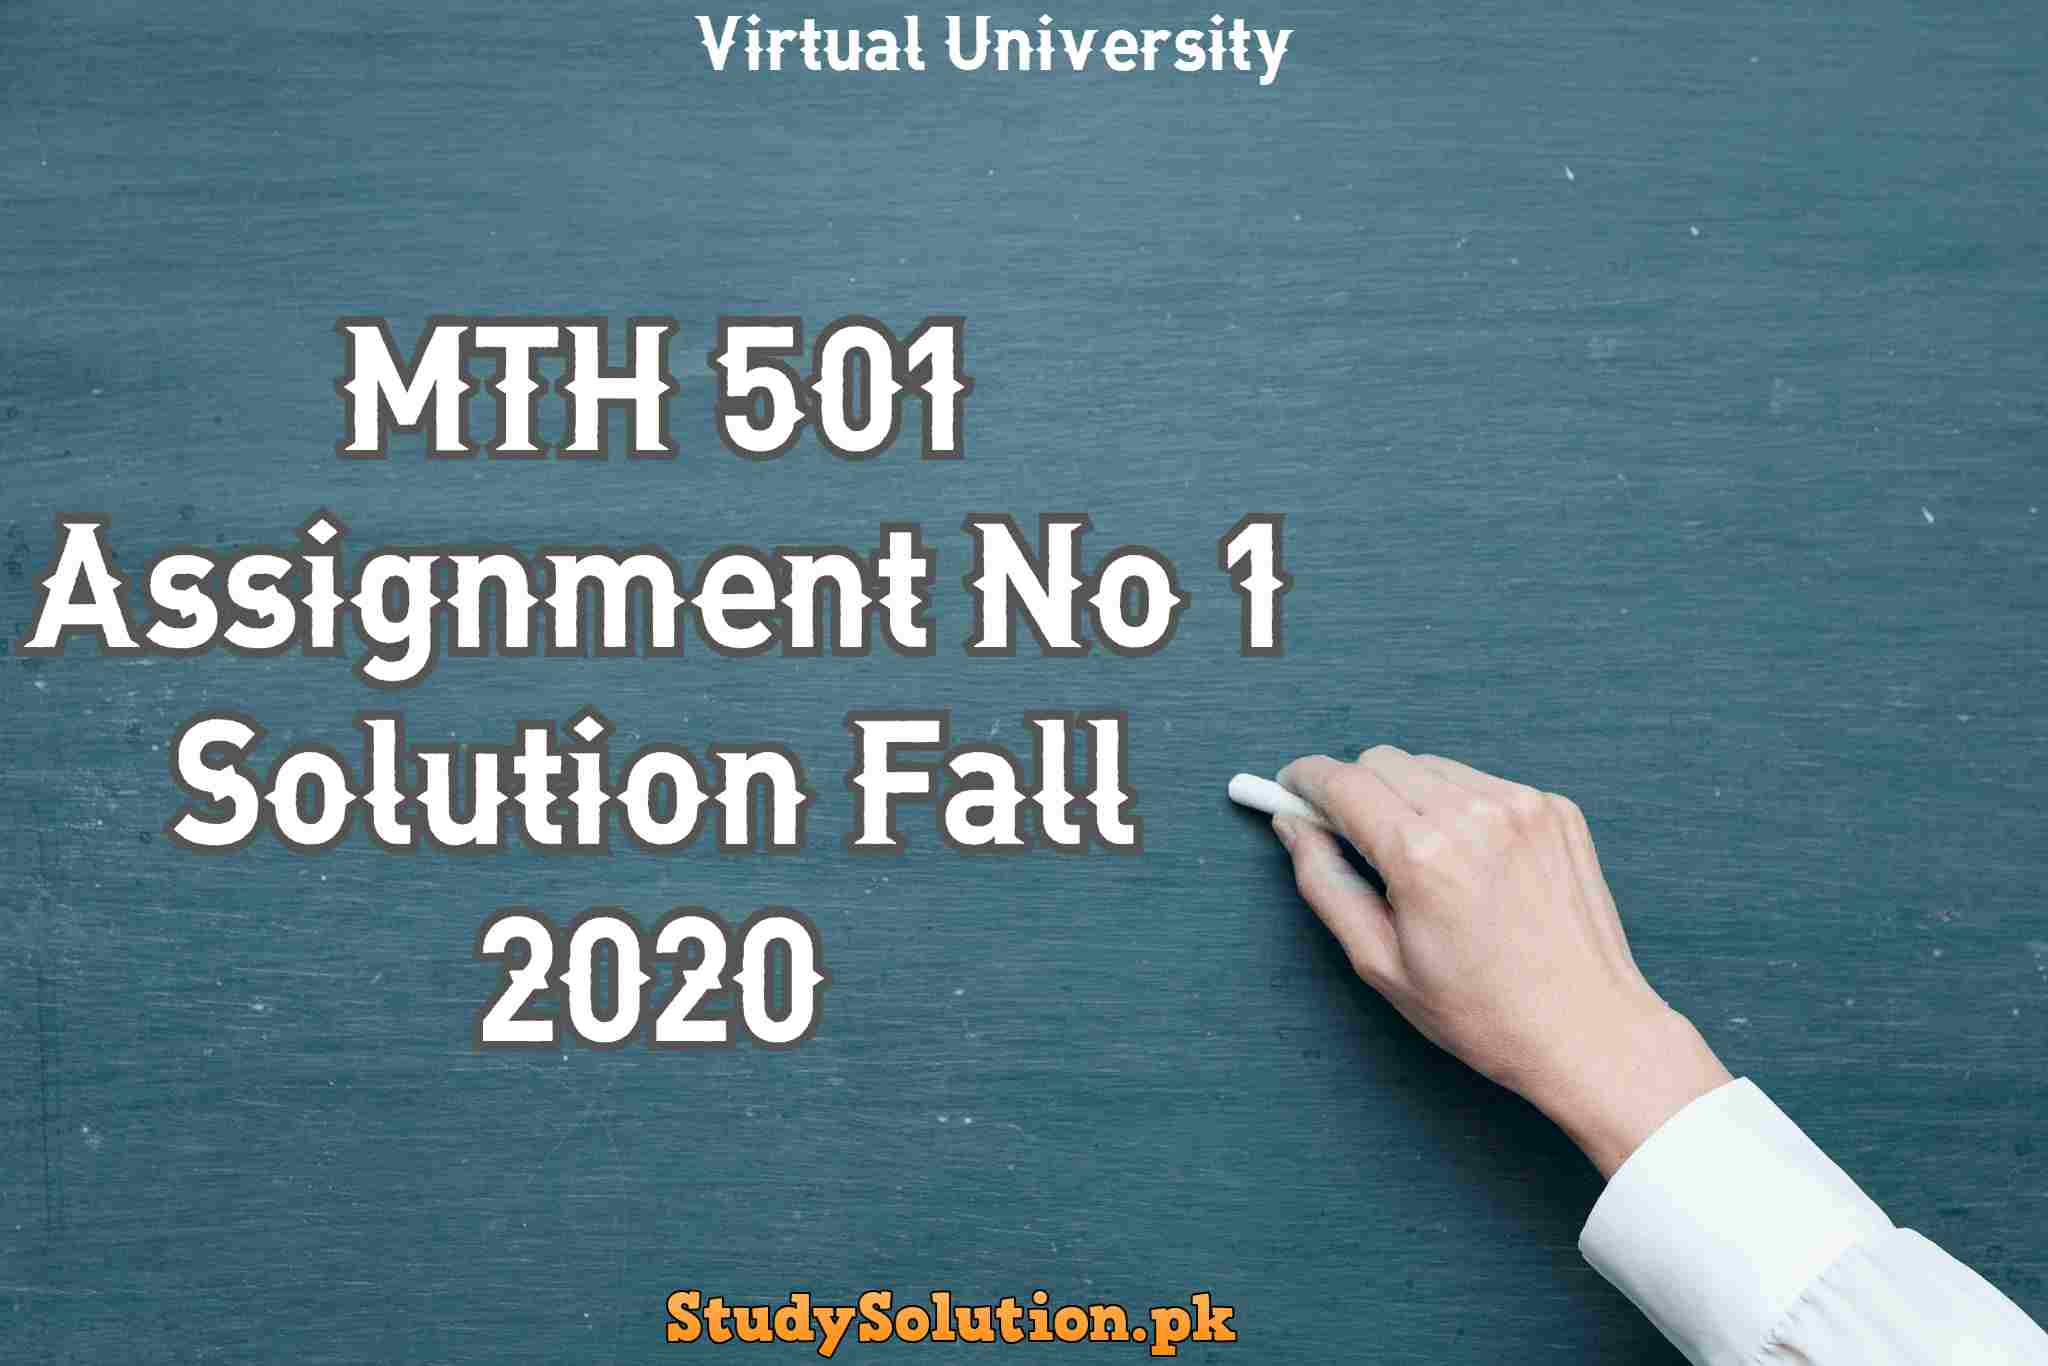 MTH 501 Assignment No 1 Solution Fall 2020